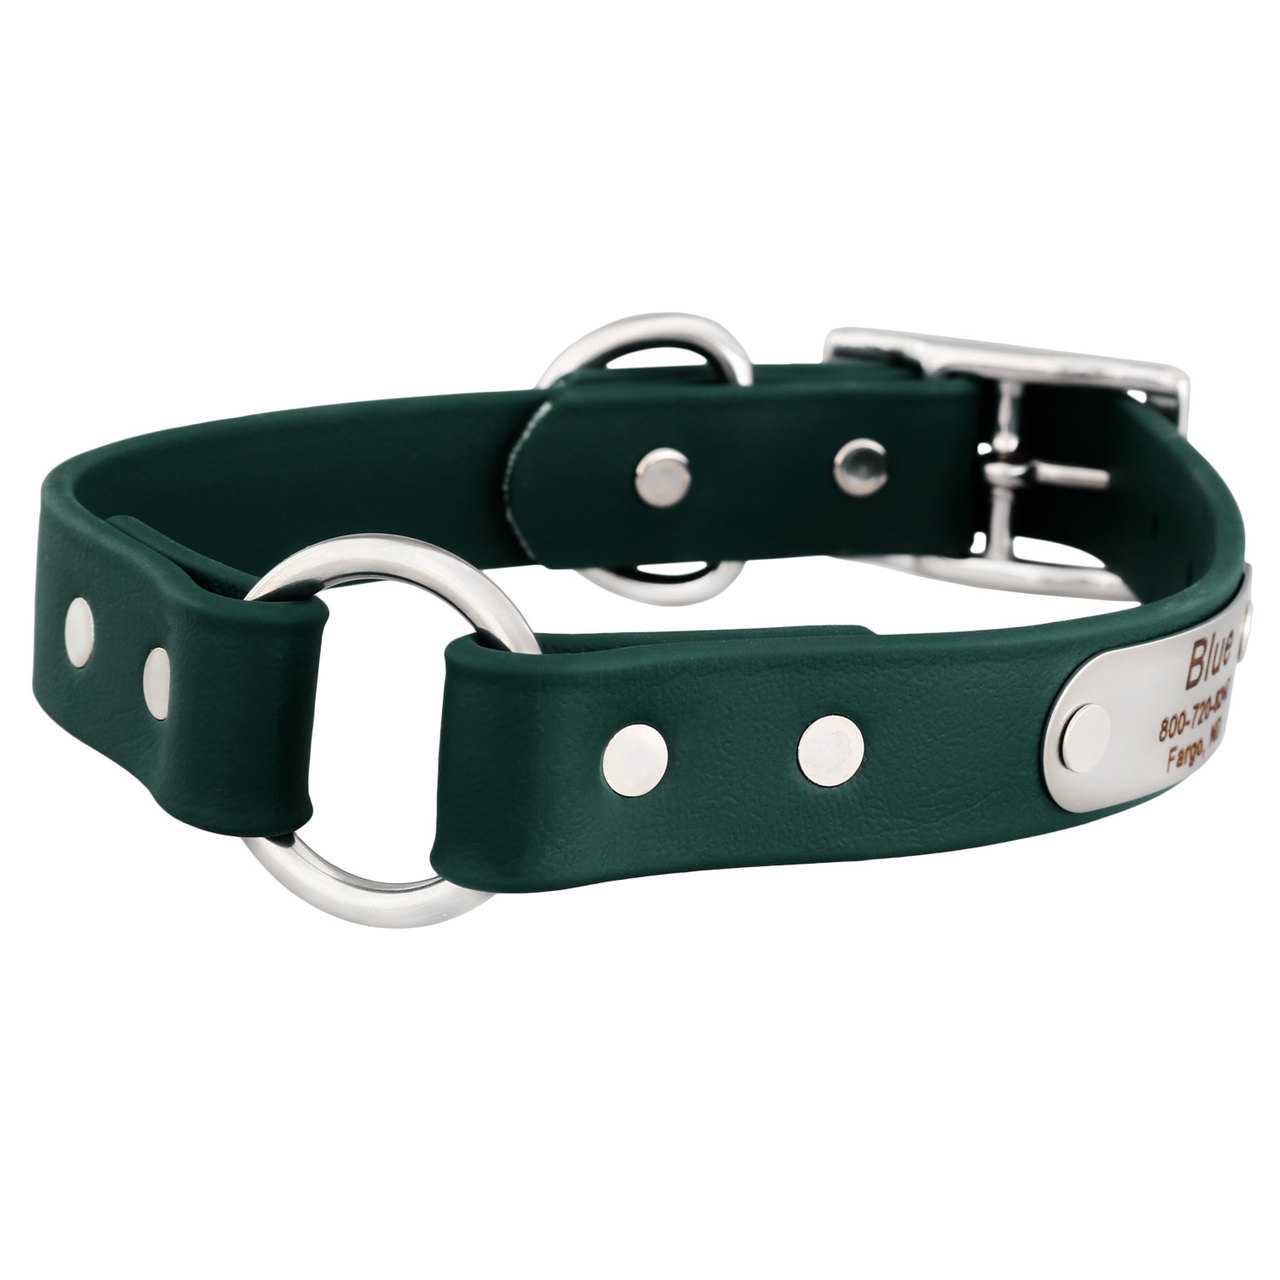 Waterproof Safety Collar with Nameplate dogIDs